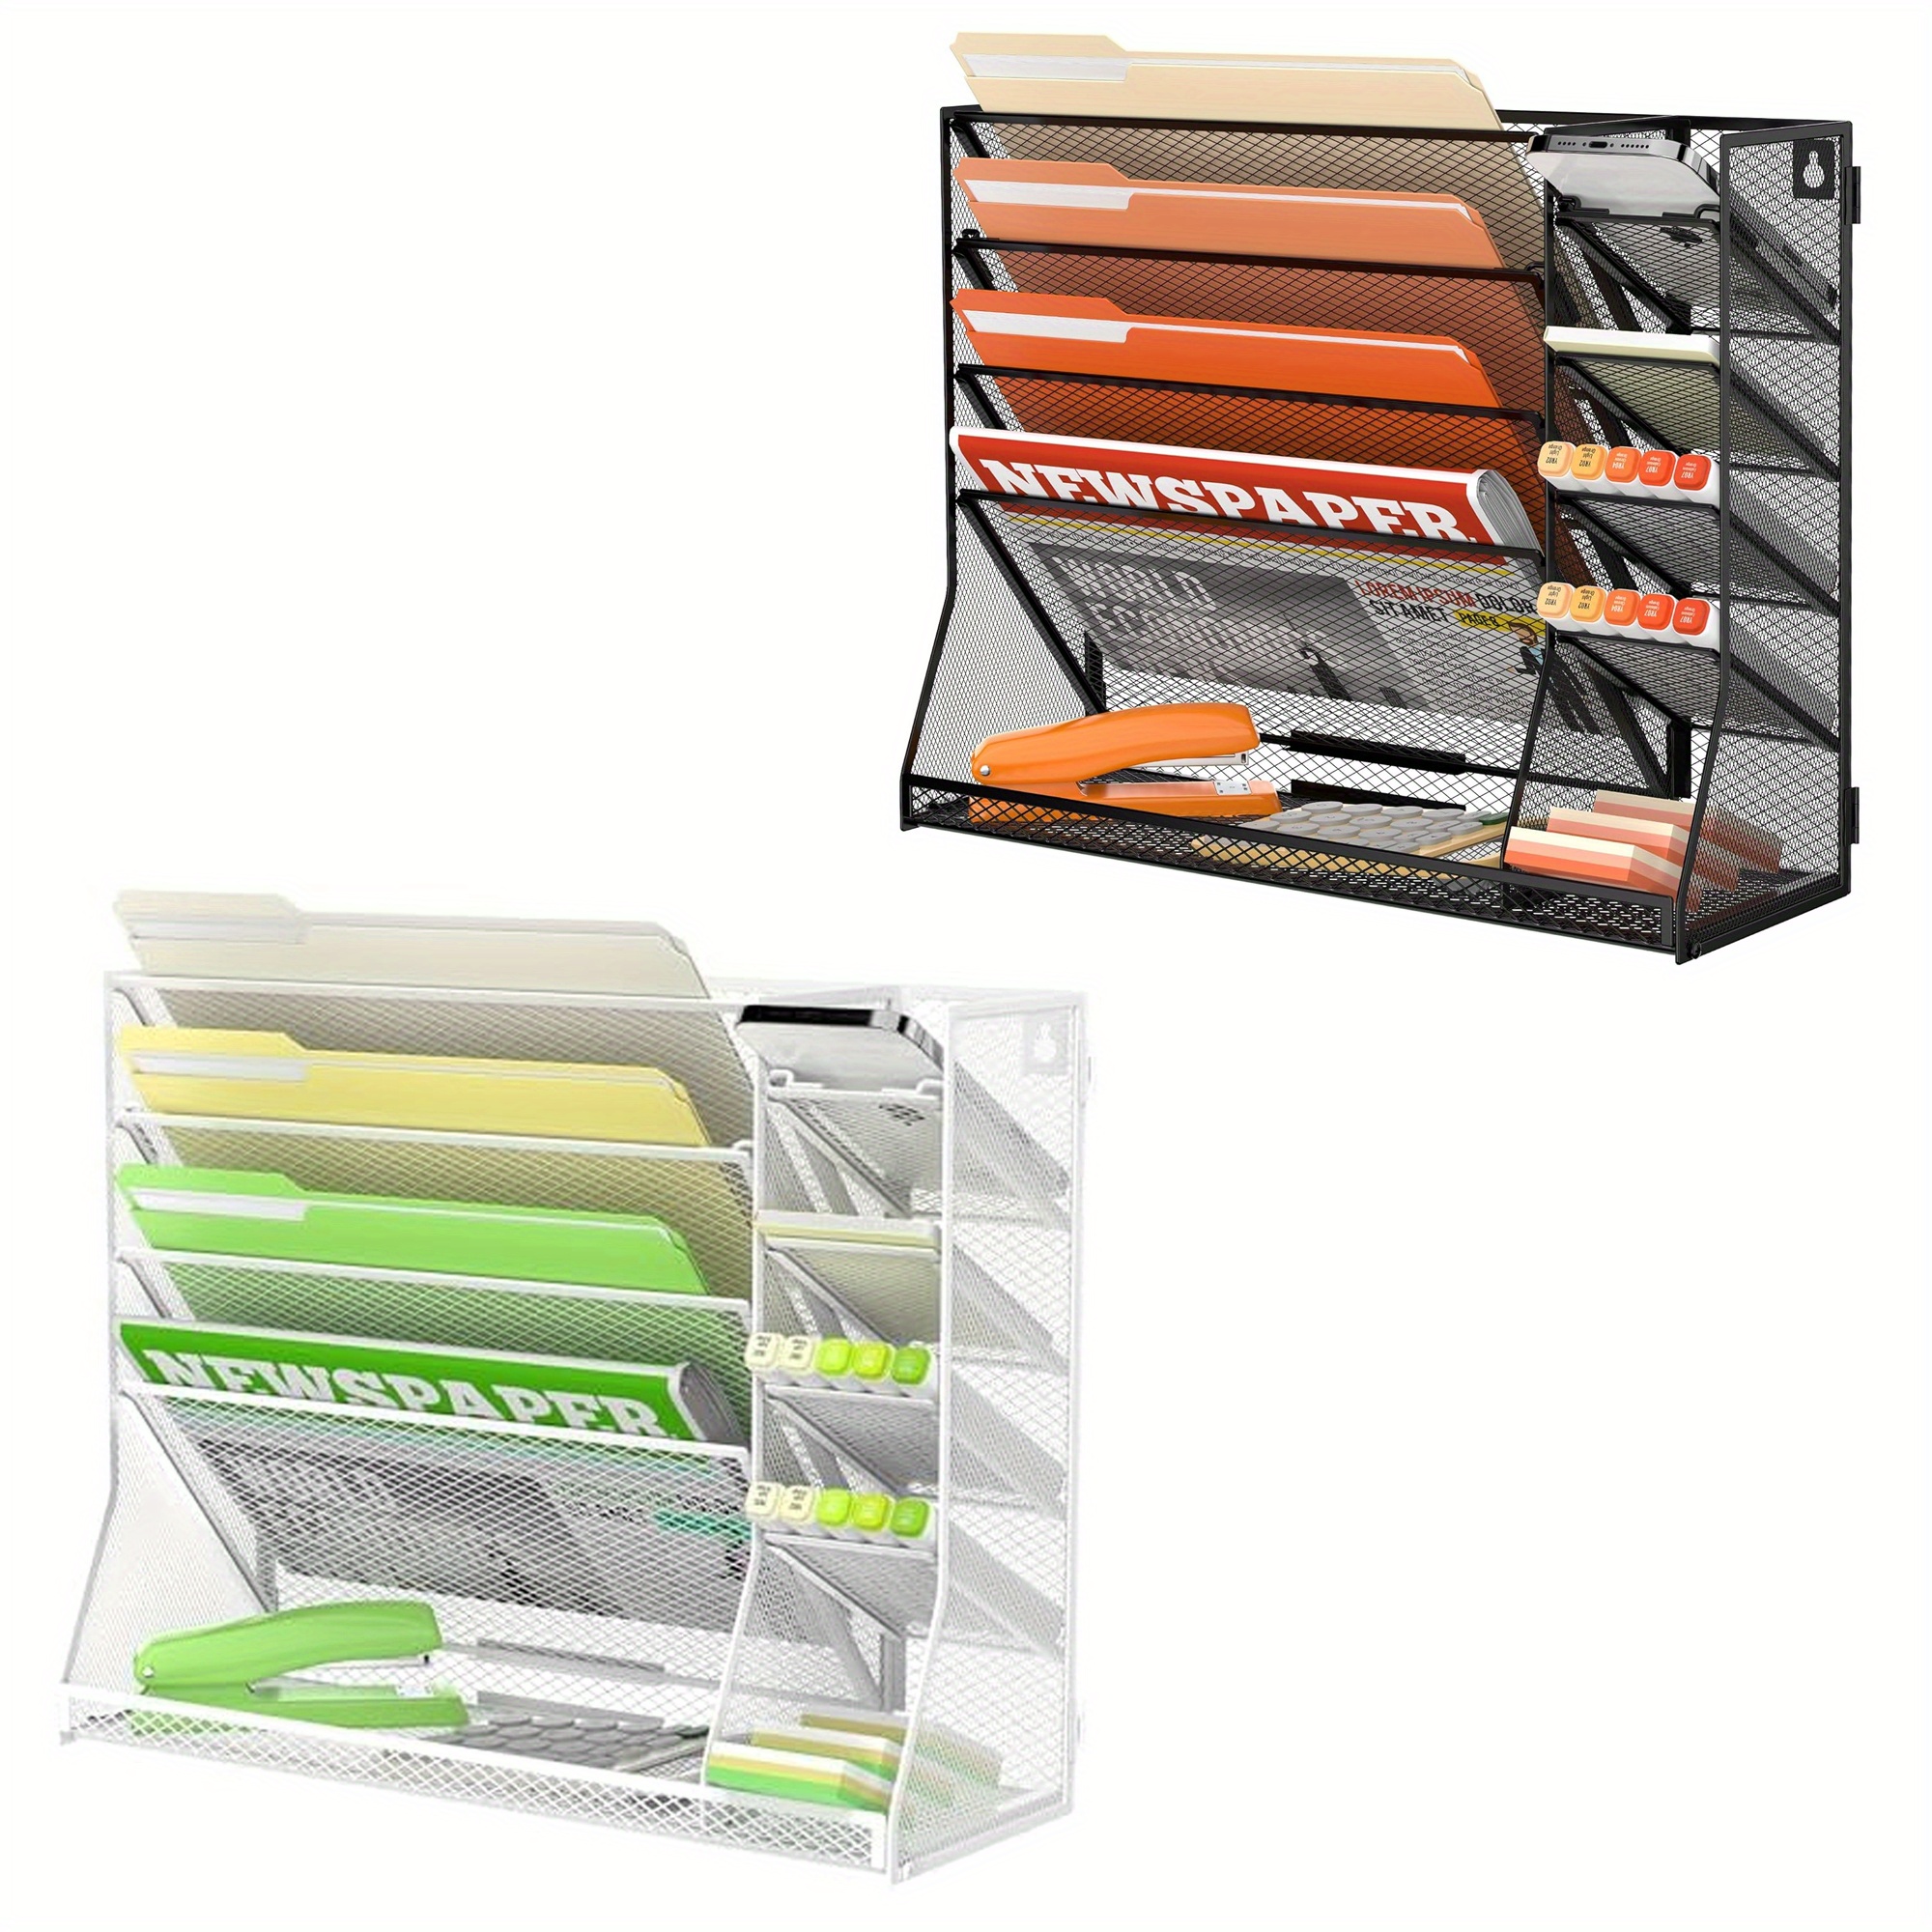 

Jmhud 5-layer Office Desk Organizer With 4 Pen Holders, Wall Mounted File Organizer, Office Desk Organizer And Accessories For Office Supplies, Office Wall Organizer With R-shaped Bottom Tray